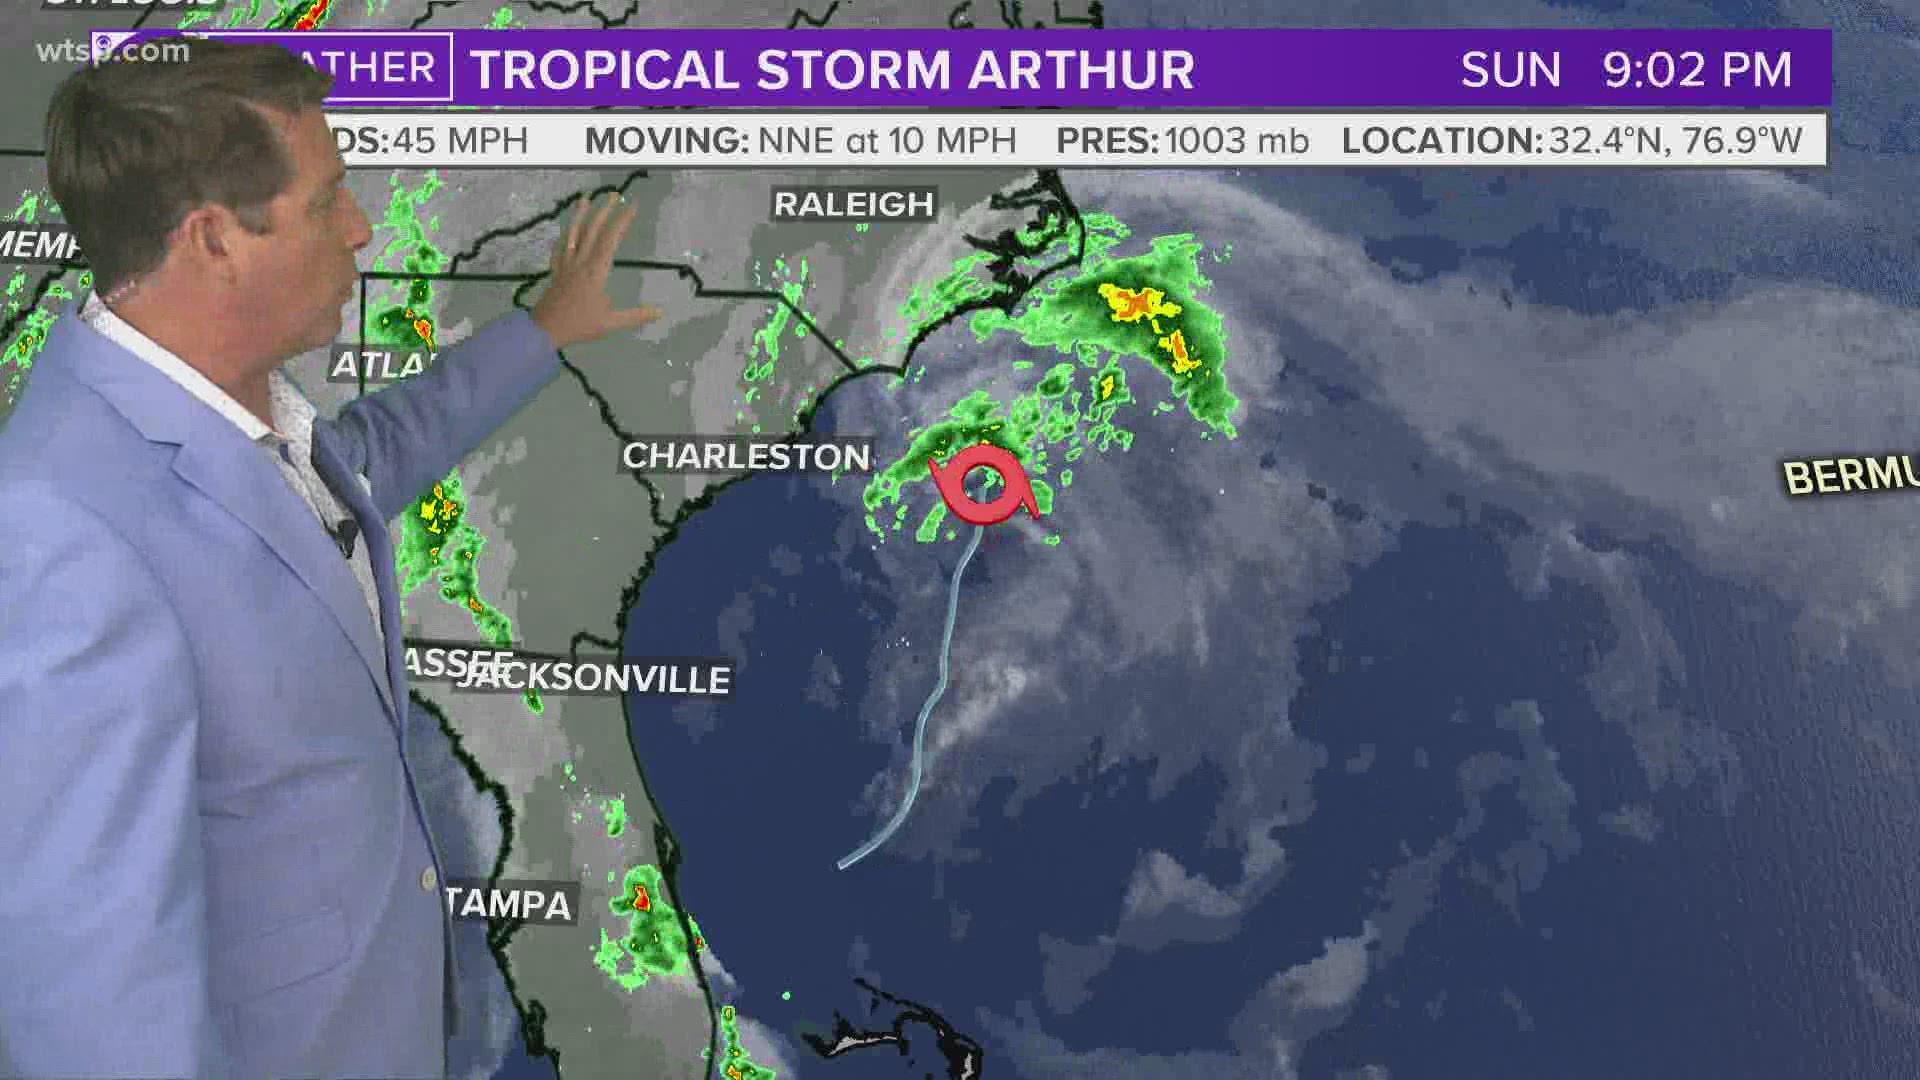 Nearly two weeks before the official start of the 2020 Atlantic hurricane season, the first tropical storm continues its trek toward the Carolinas.